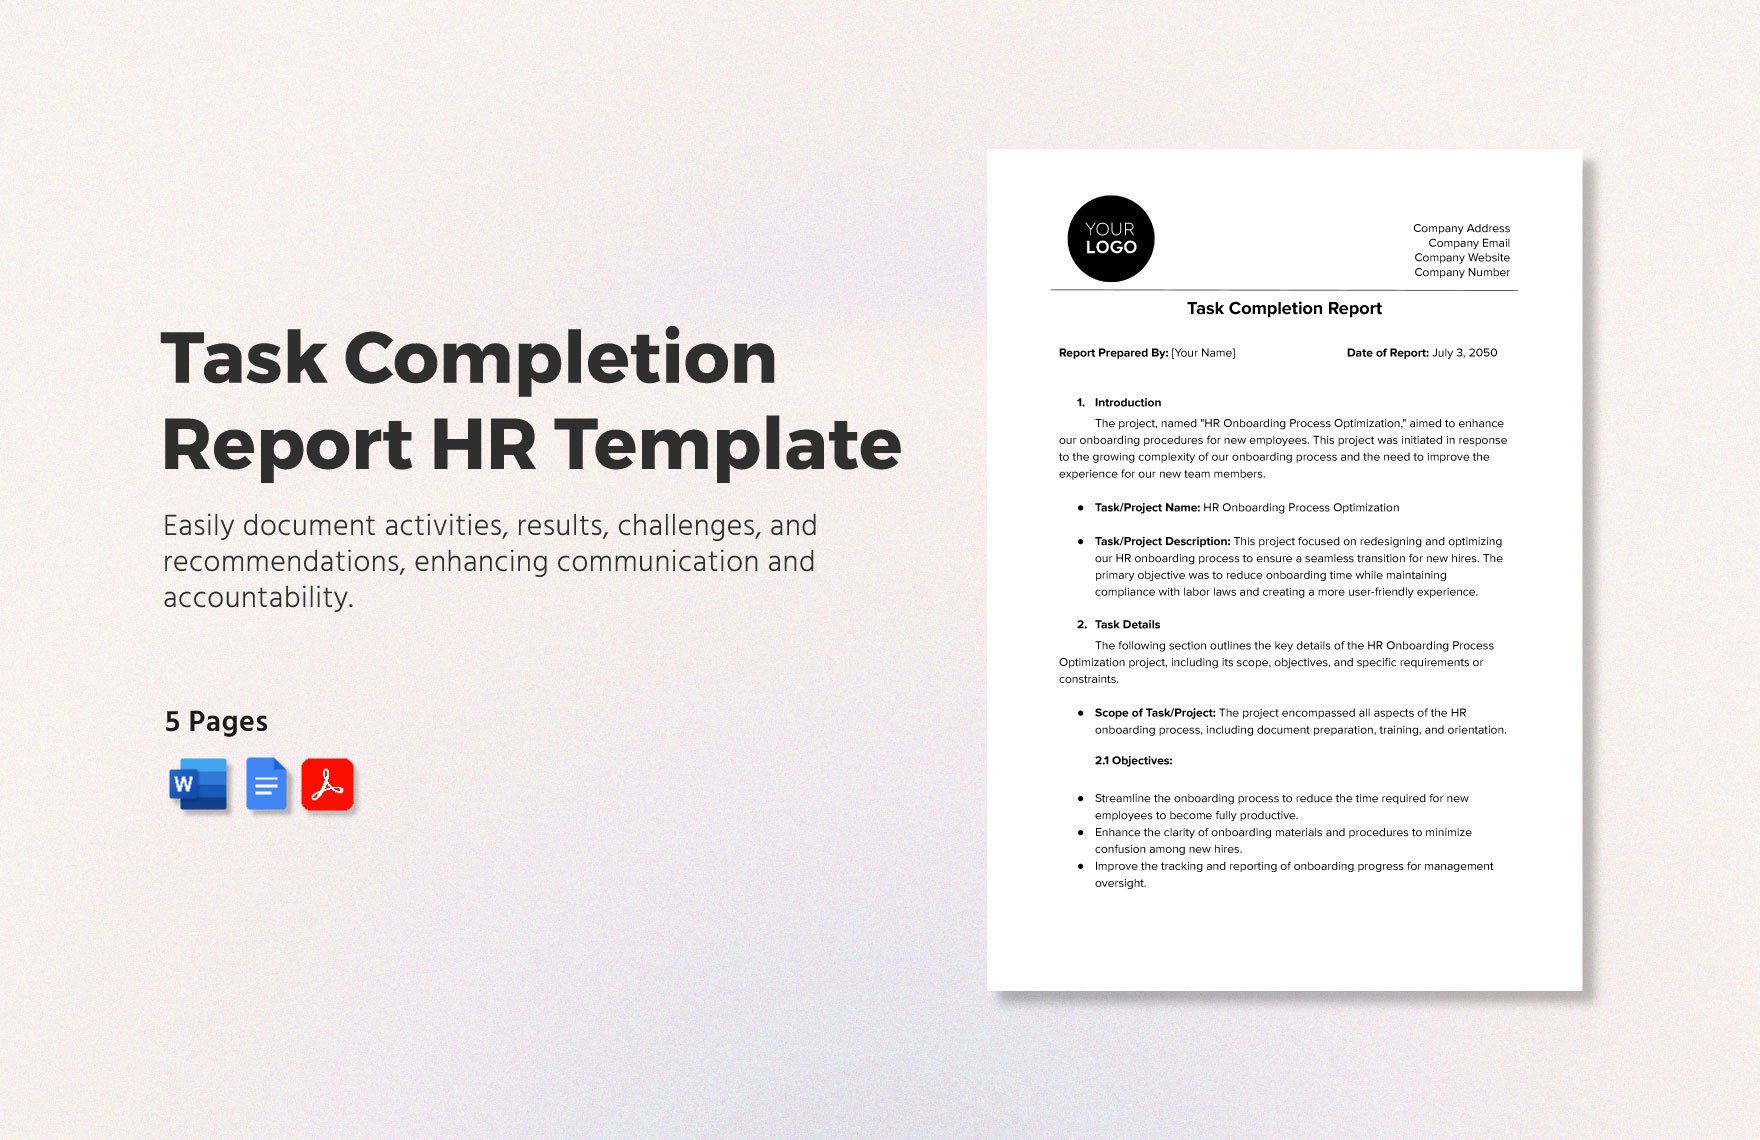 Task Completion Report HR Template